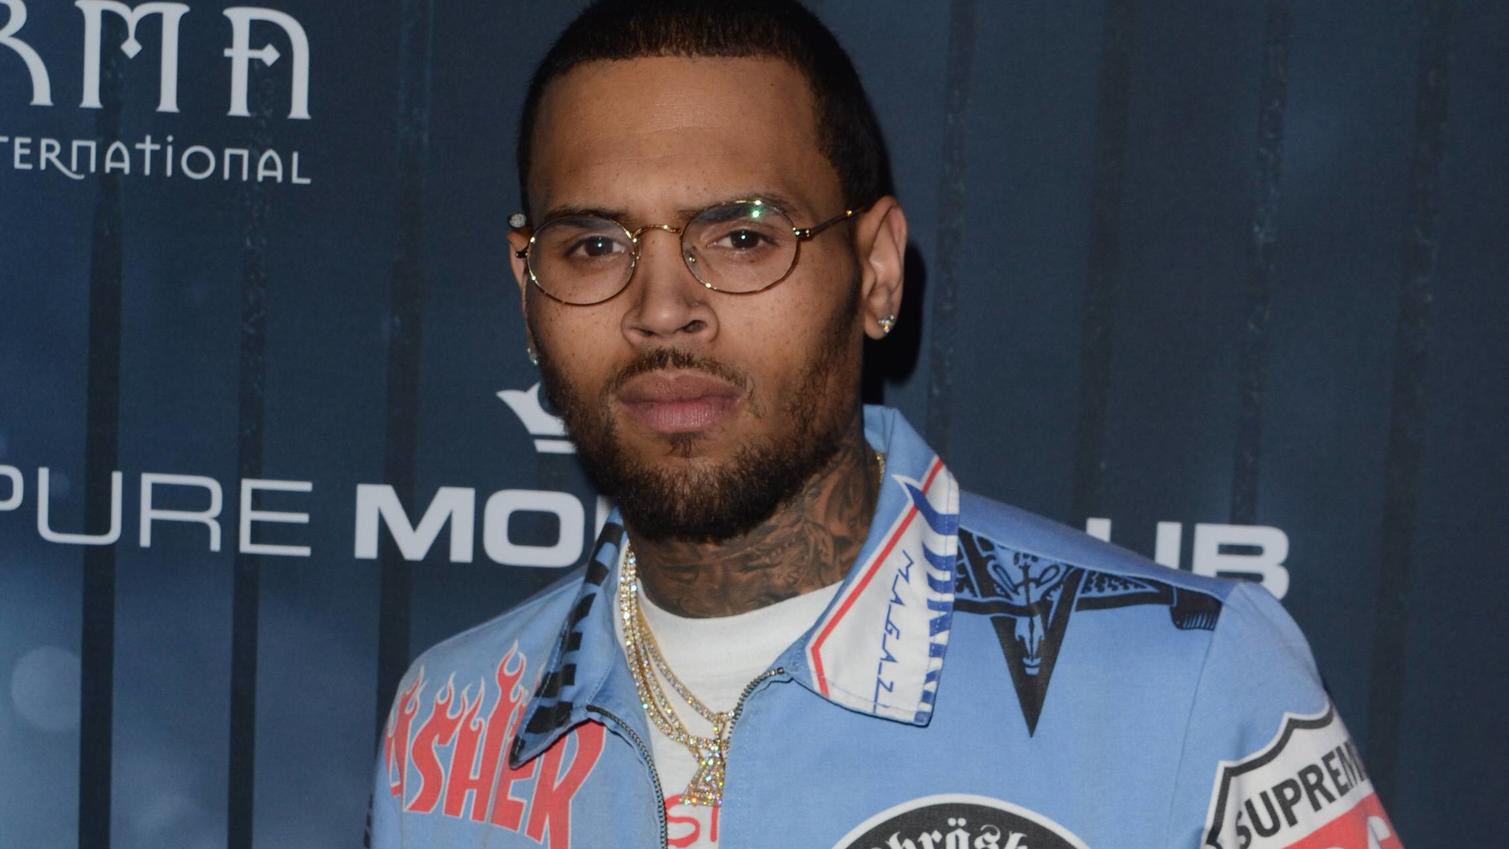 ***FILE PHOTO*** Chris Brown Arrested on Rape Allegations in Paris LOS ANGELES, CA - OCTOBER 22: Chris Brown at the Maxim Halloween at The Shrine Expo Hall on October 22, 2016 in Los Angeles, California. PUBLICATIONxINxGERxSUIxAUTxONLY Copyright: xDa